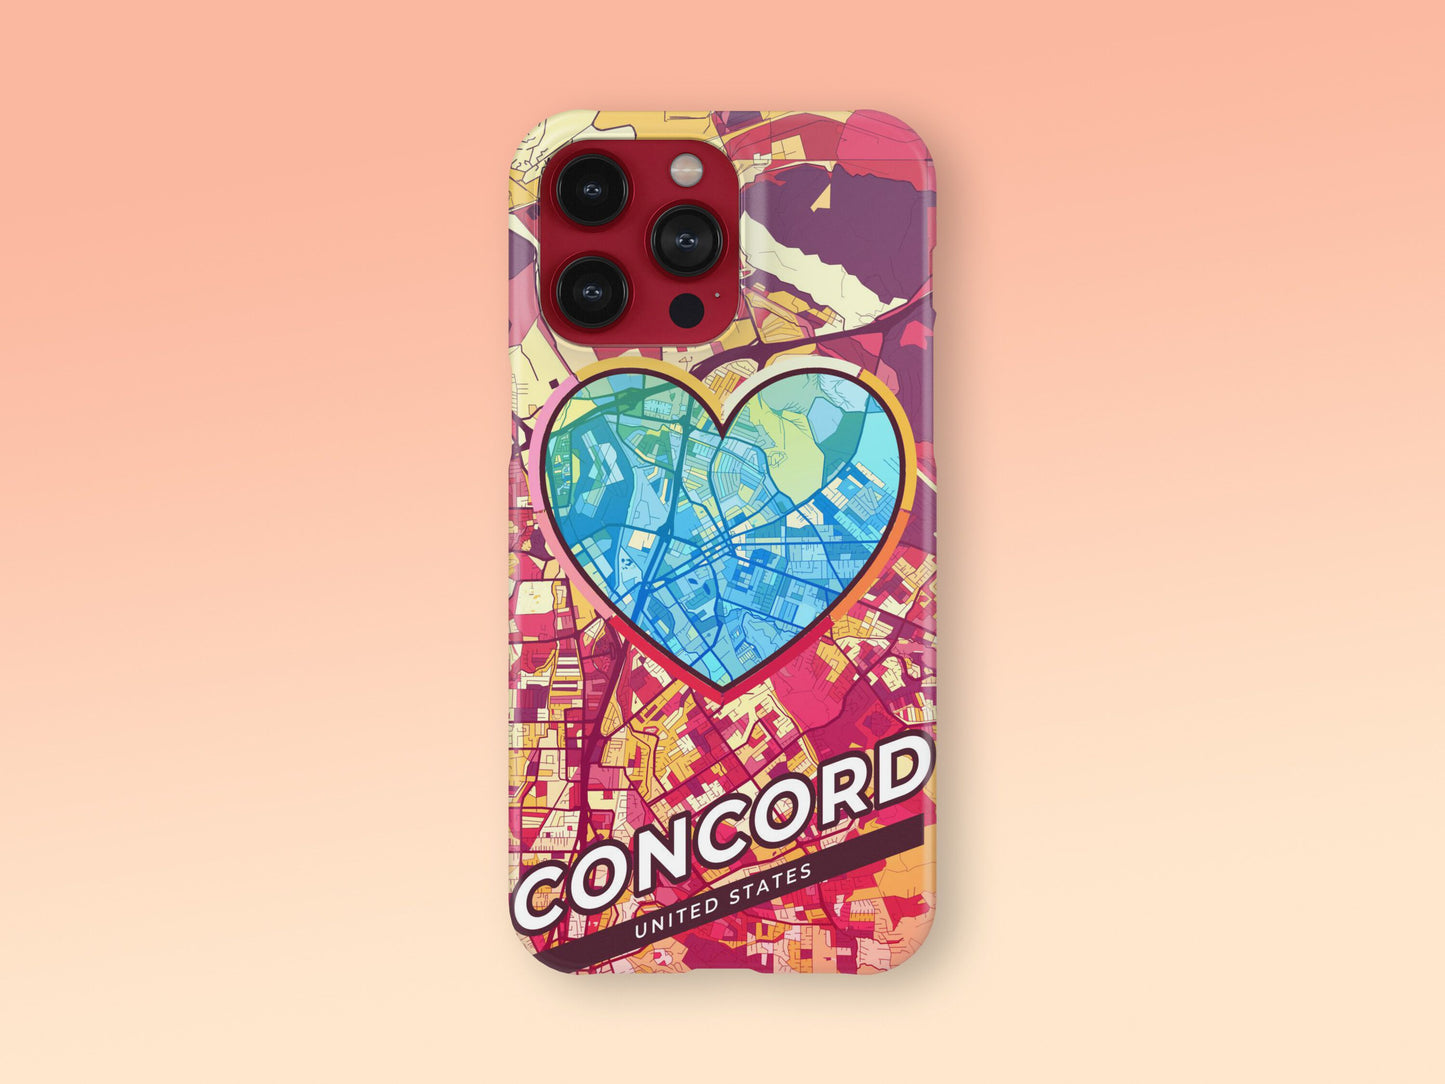 Concord California slim phone case with colorful icon. Birthday, wedding or housewarming gift. Couple match cases. 2